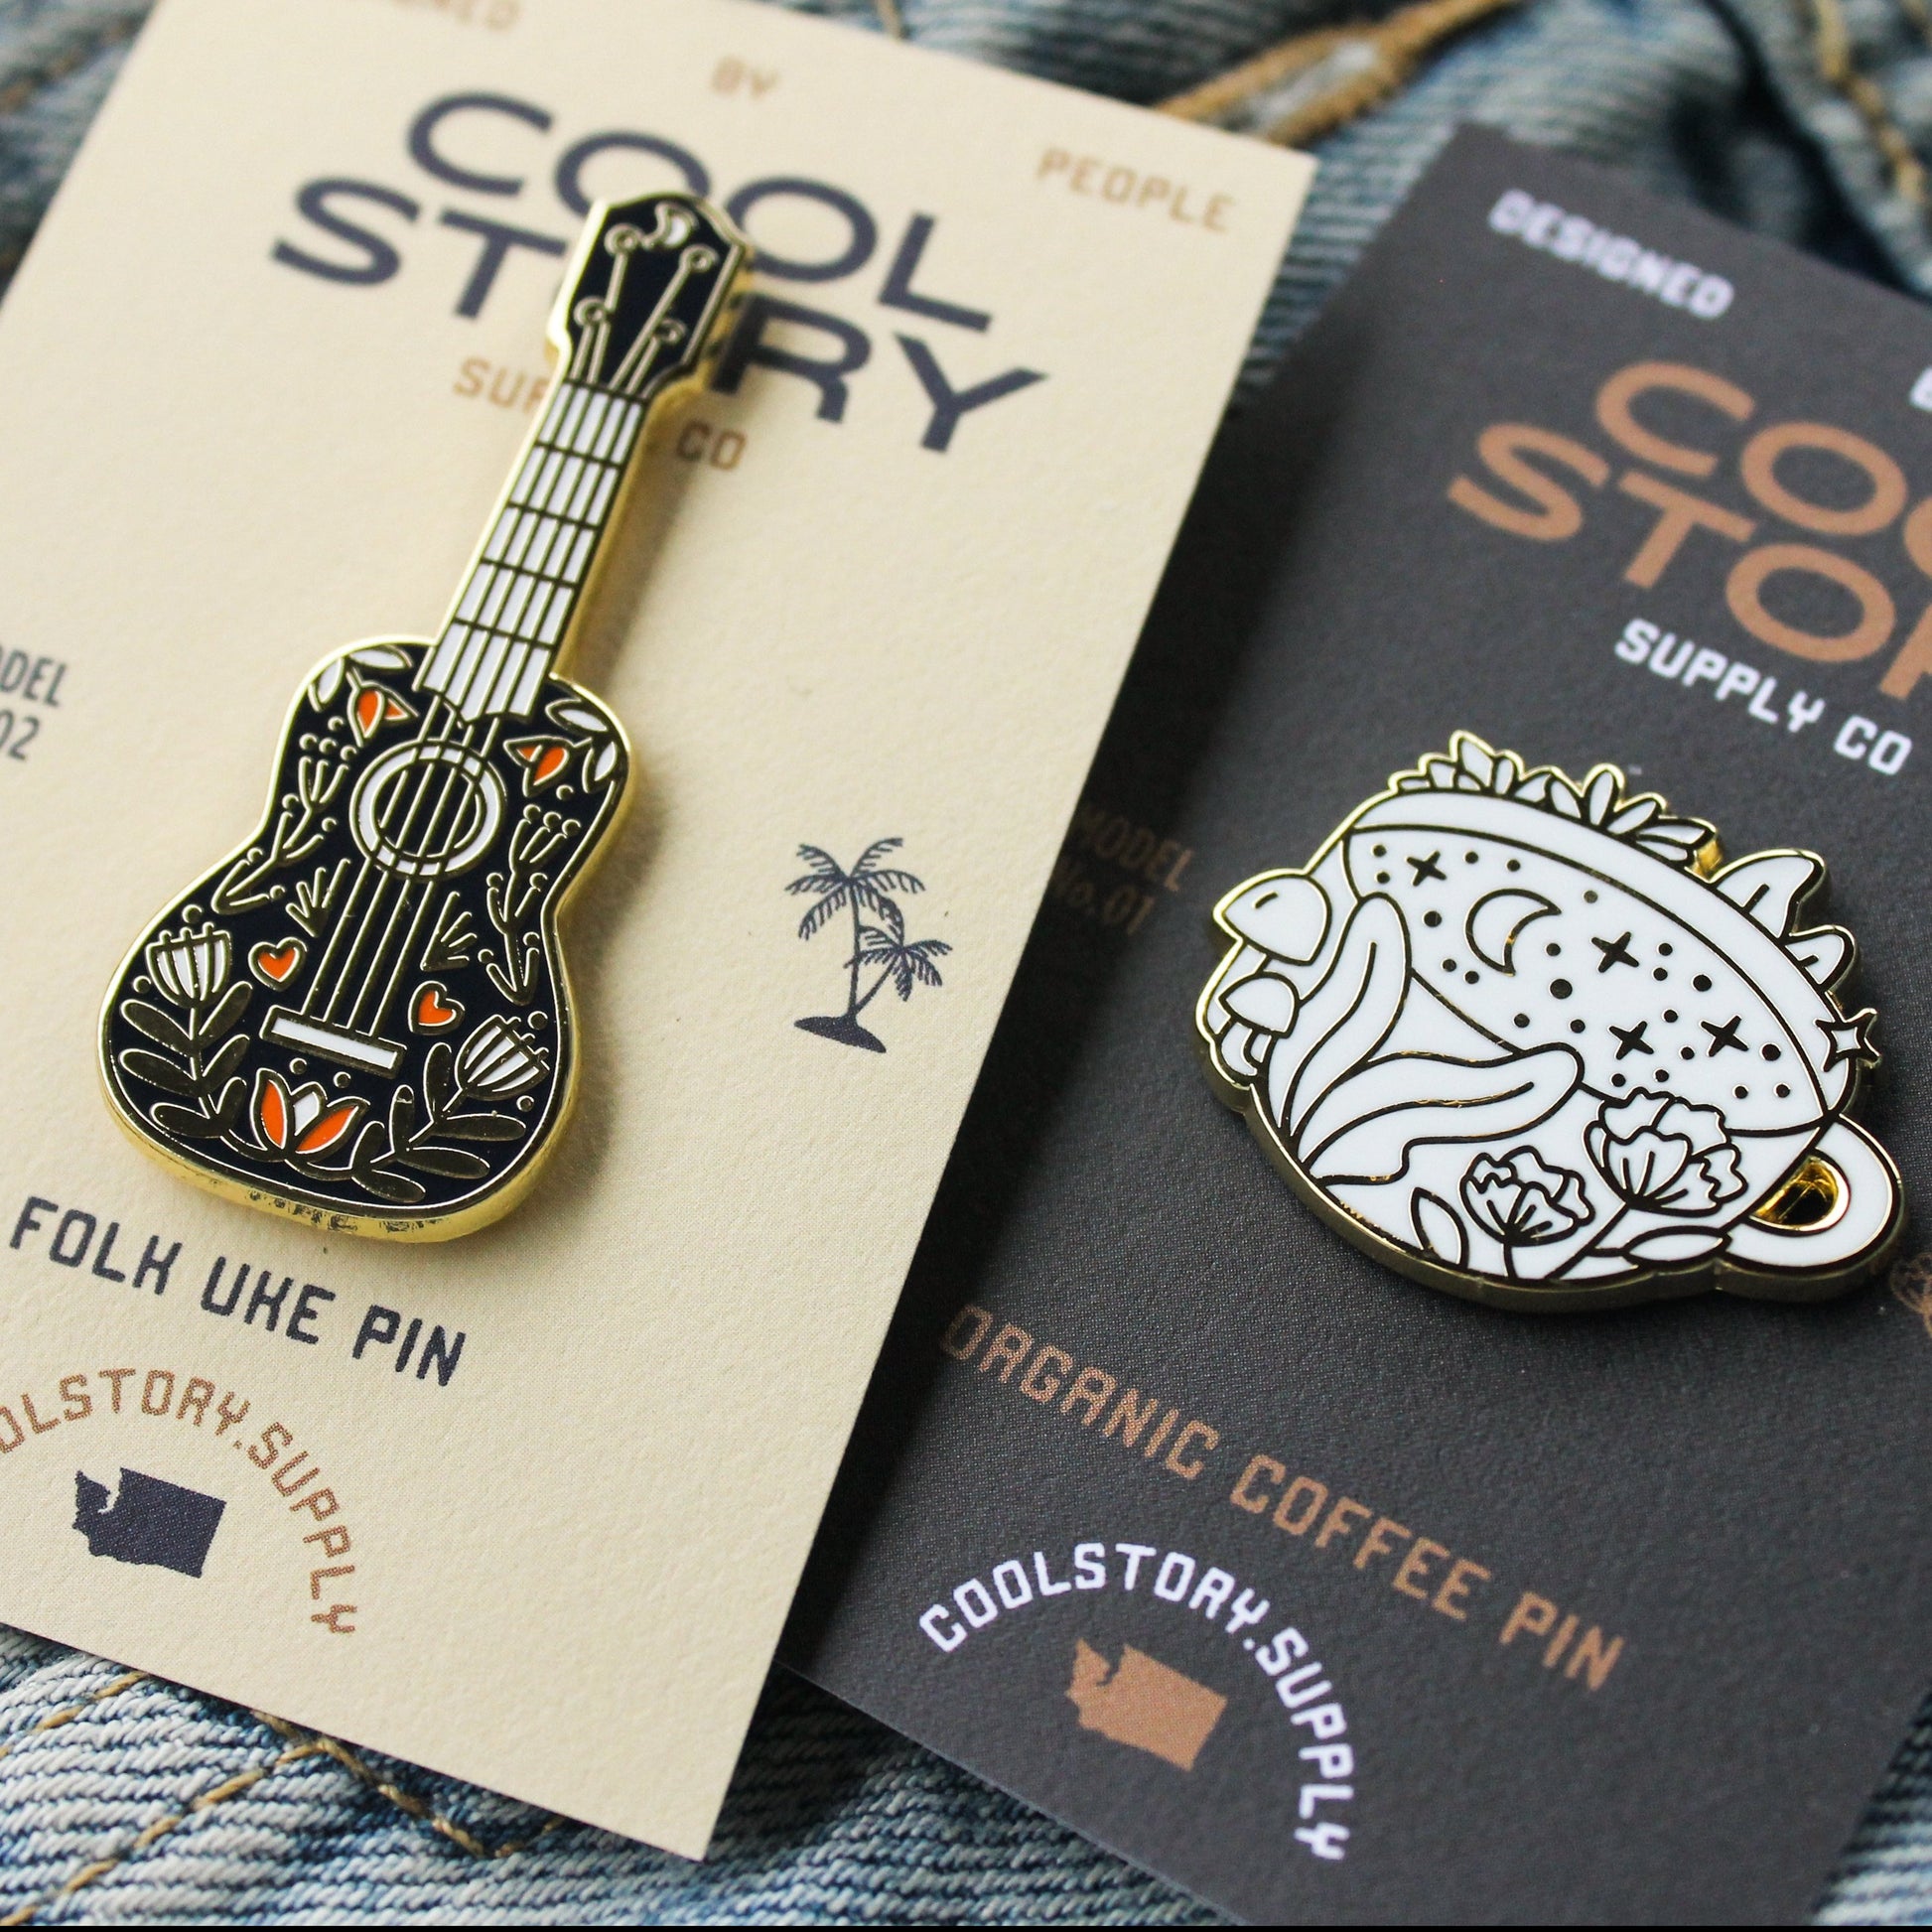 Hard Enamel Pins on a Backing Cards with "COOL STORY" Text